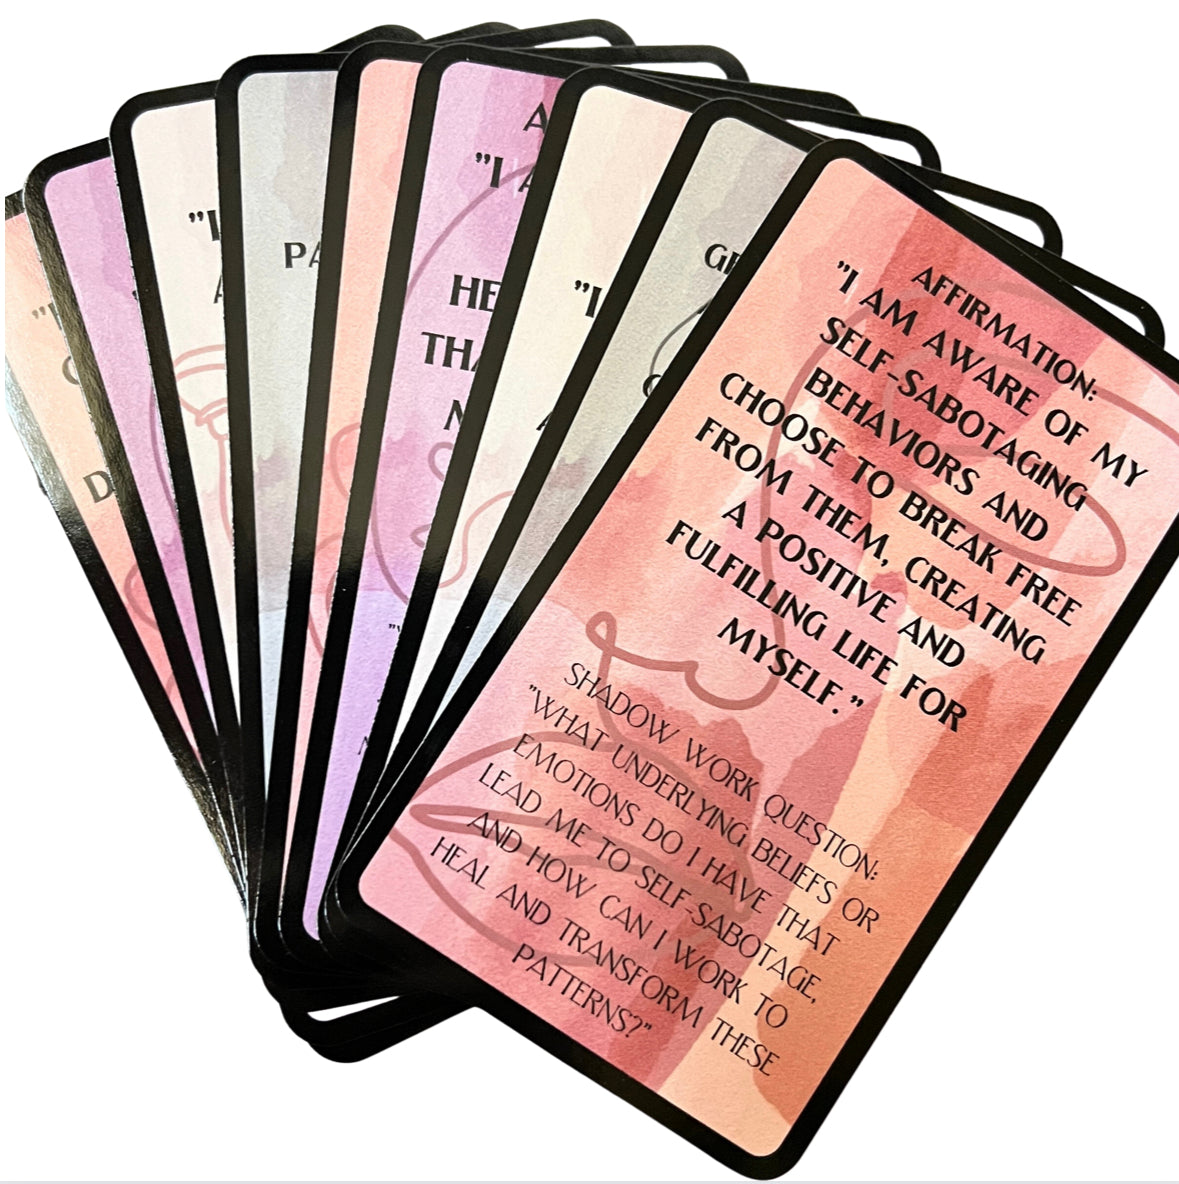 Euphoric Flame Affirmation & Shadow Cards